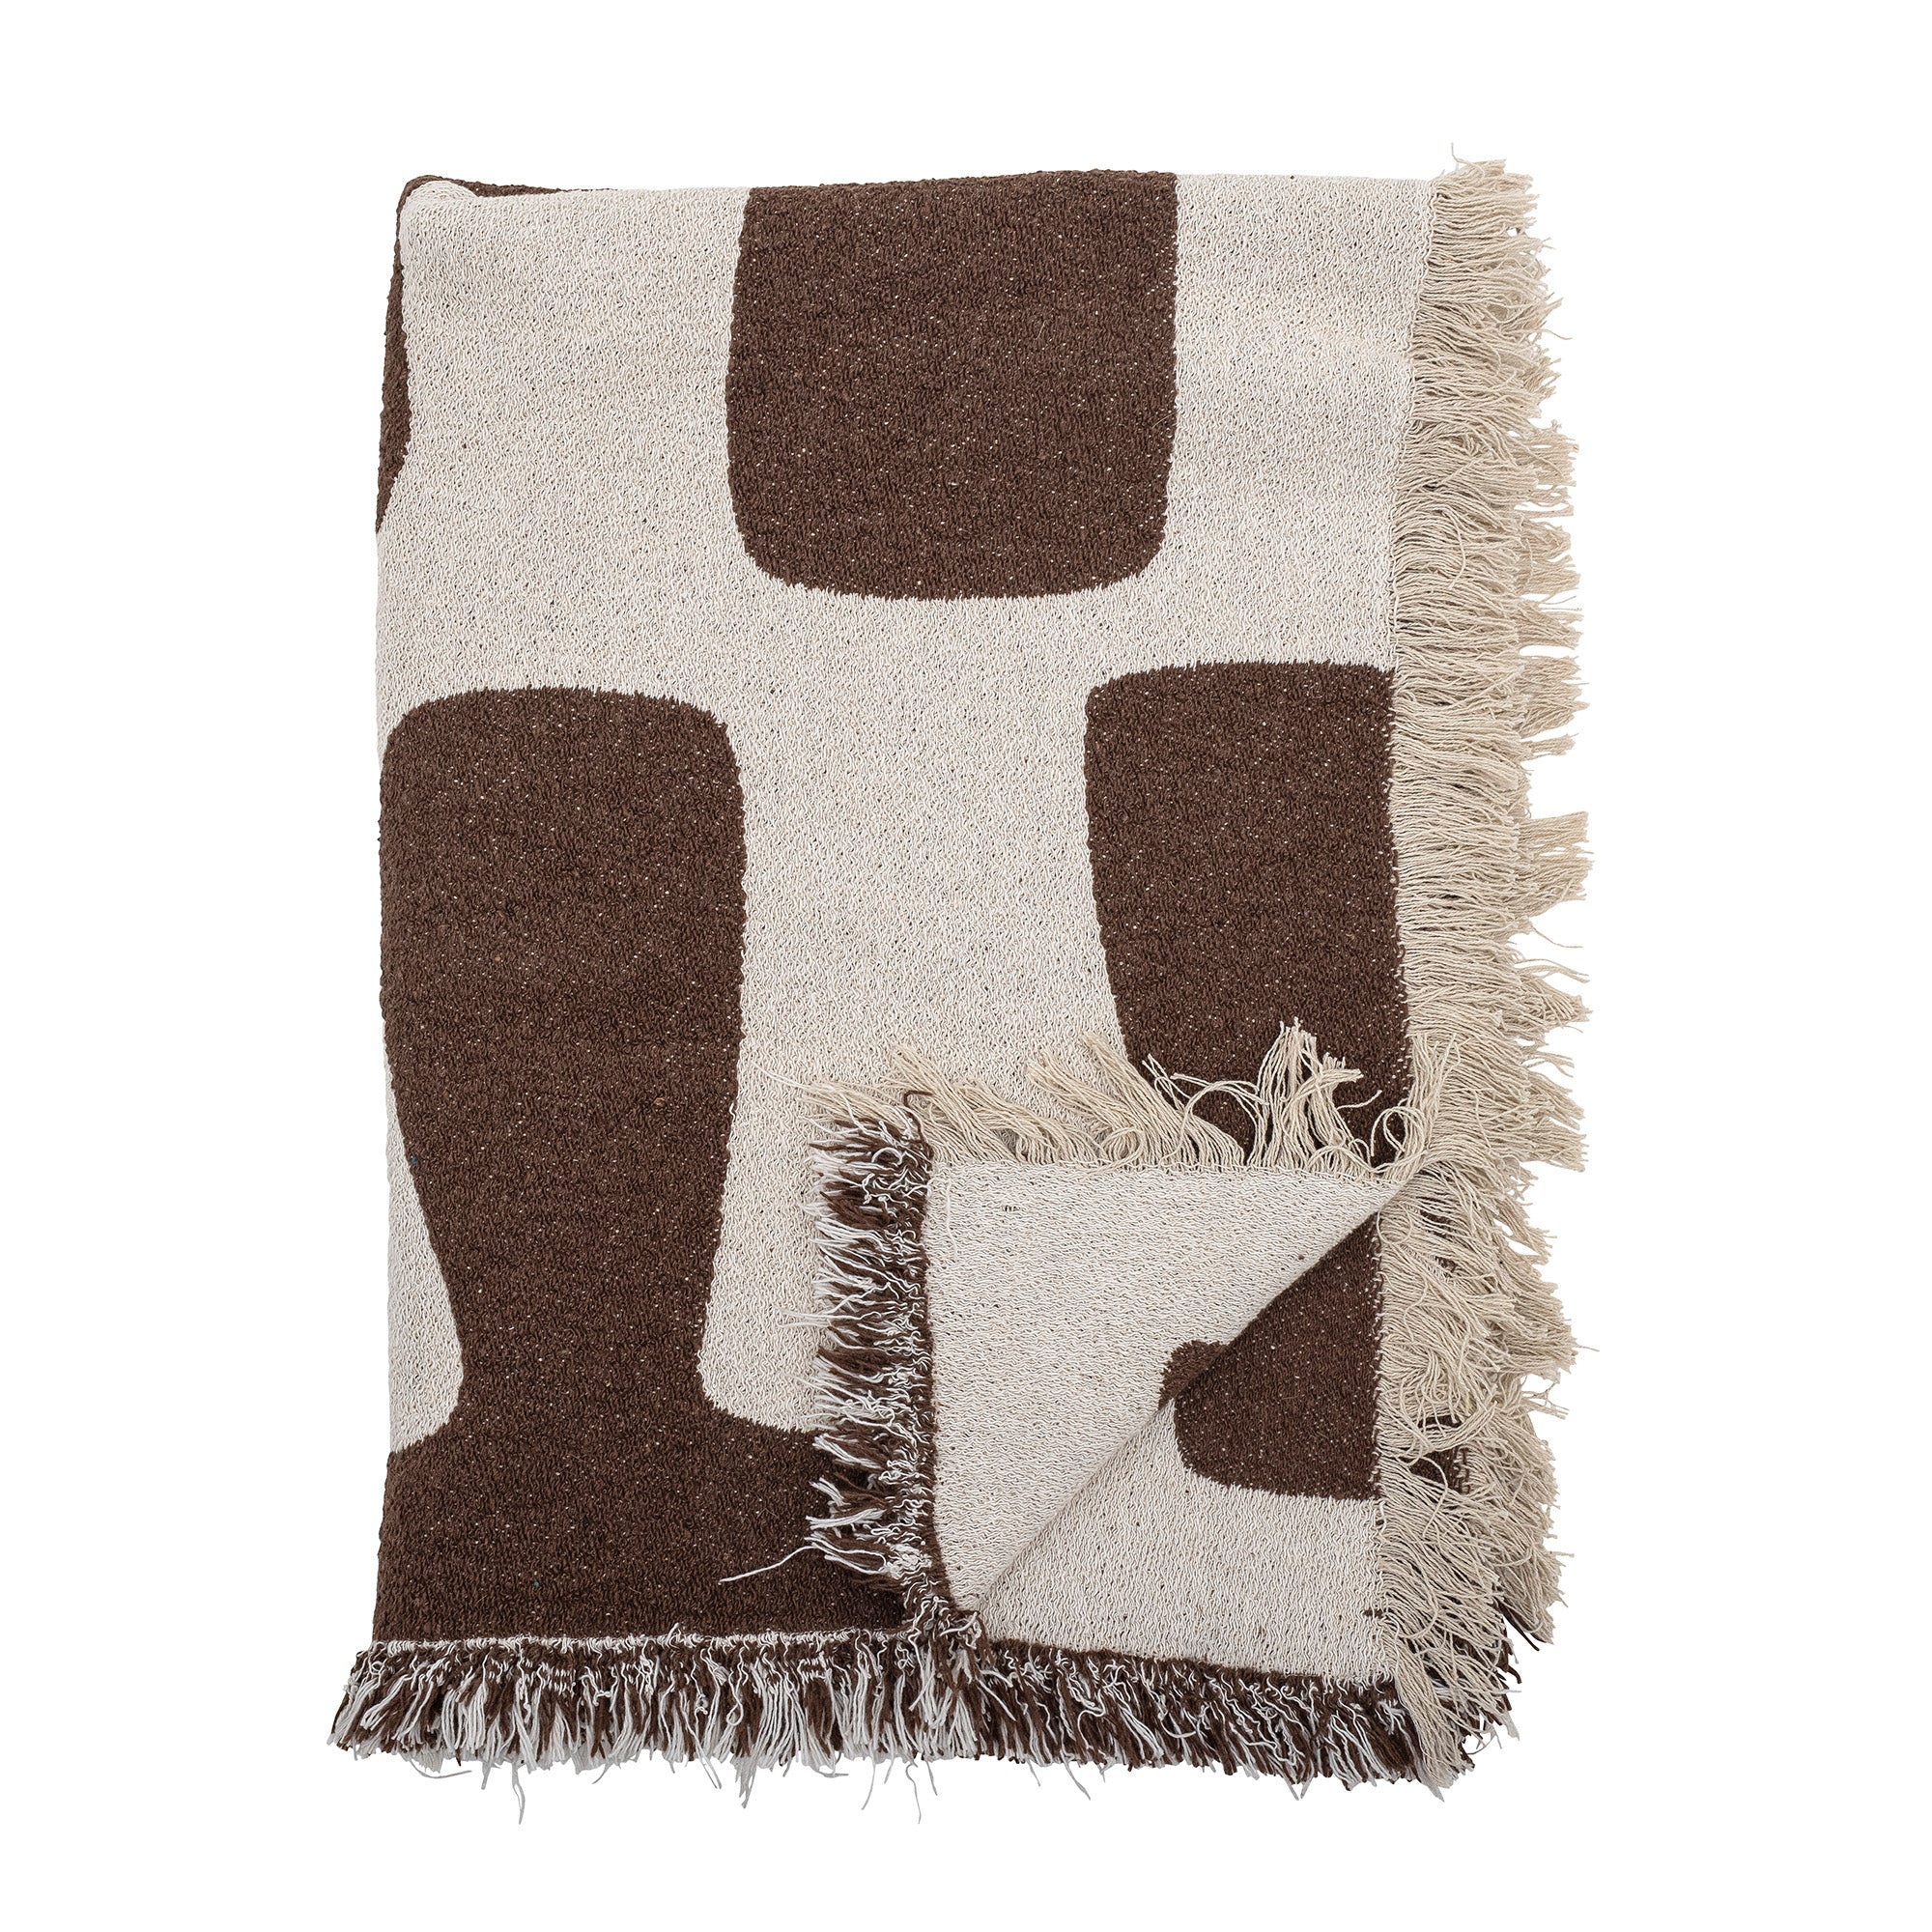 Throw Blanket - Billy Brown Abstract Recyled Cotton